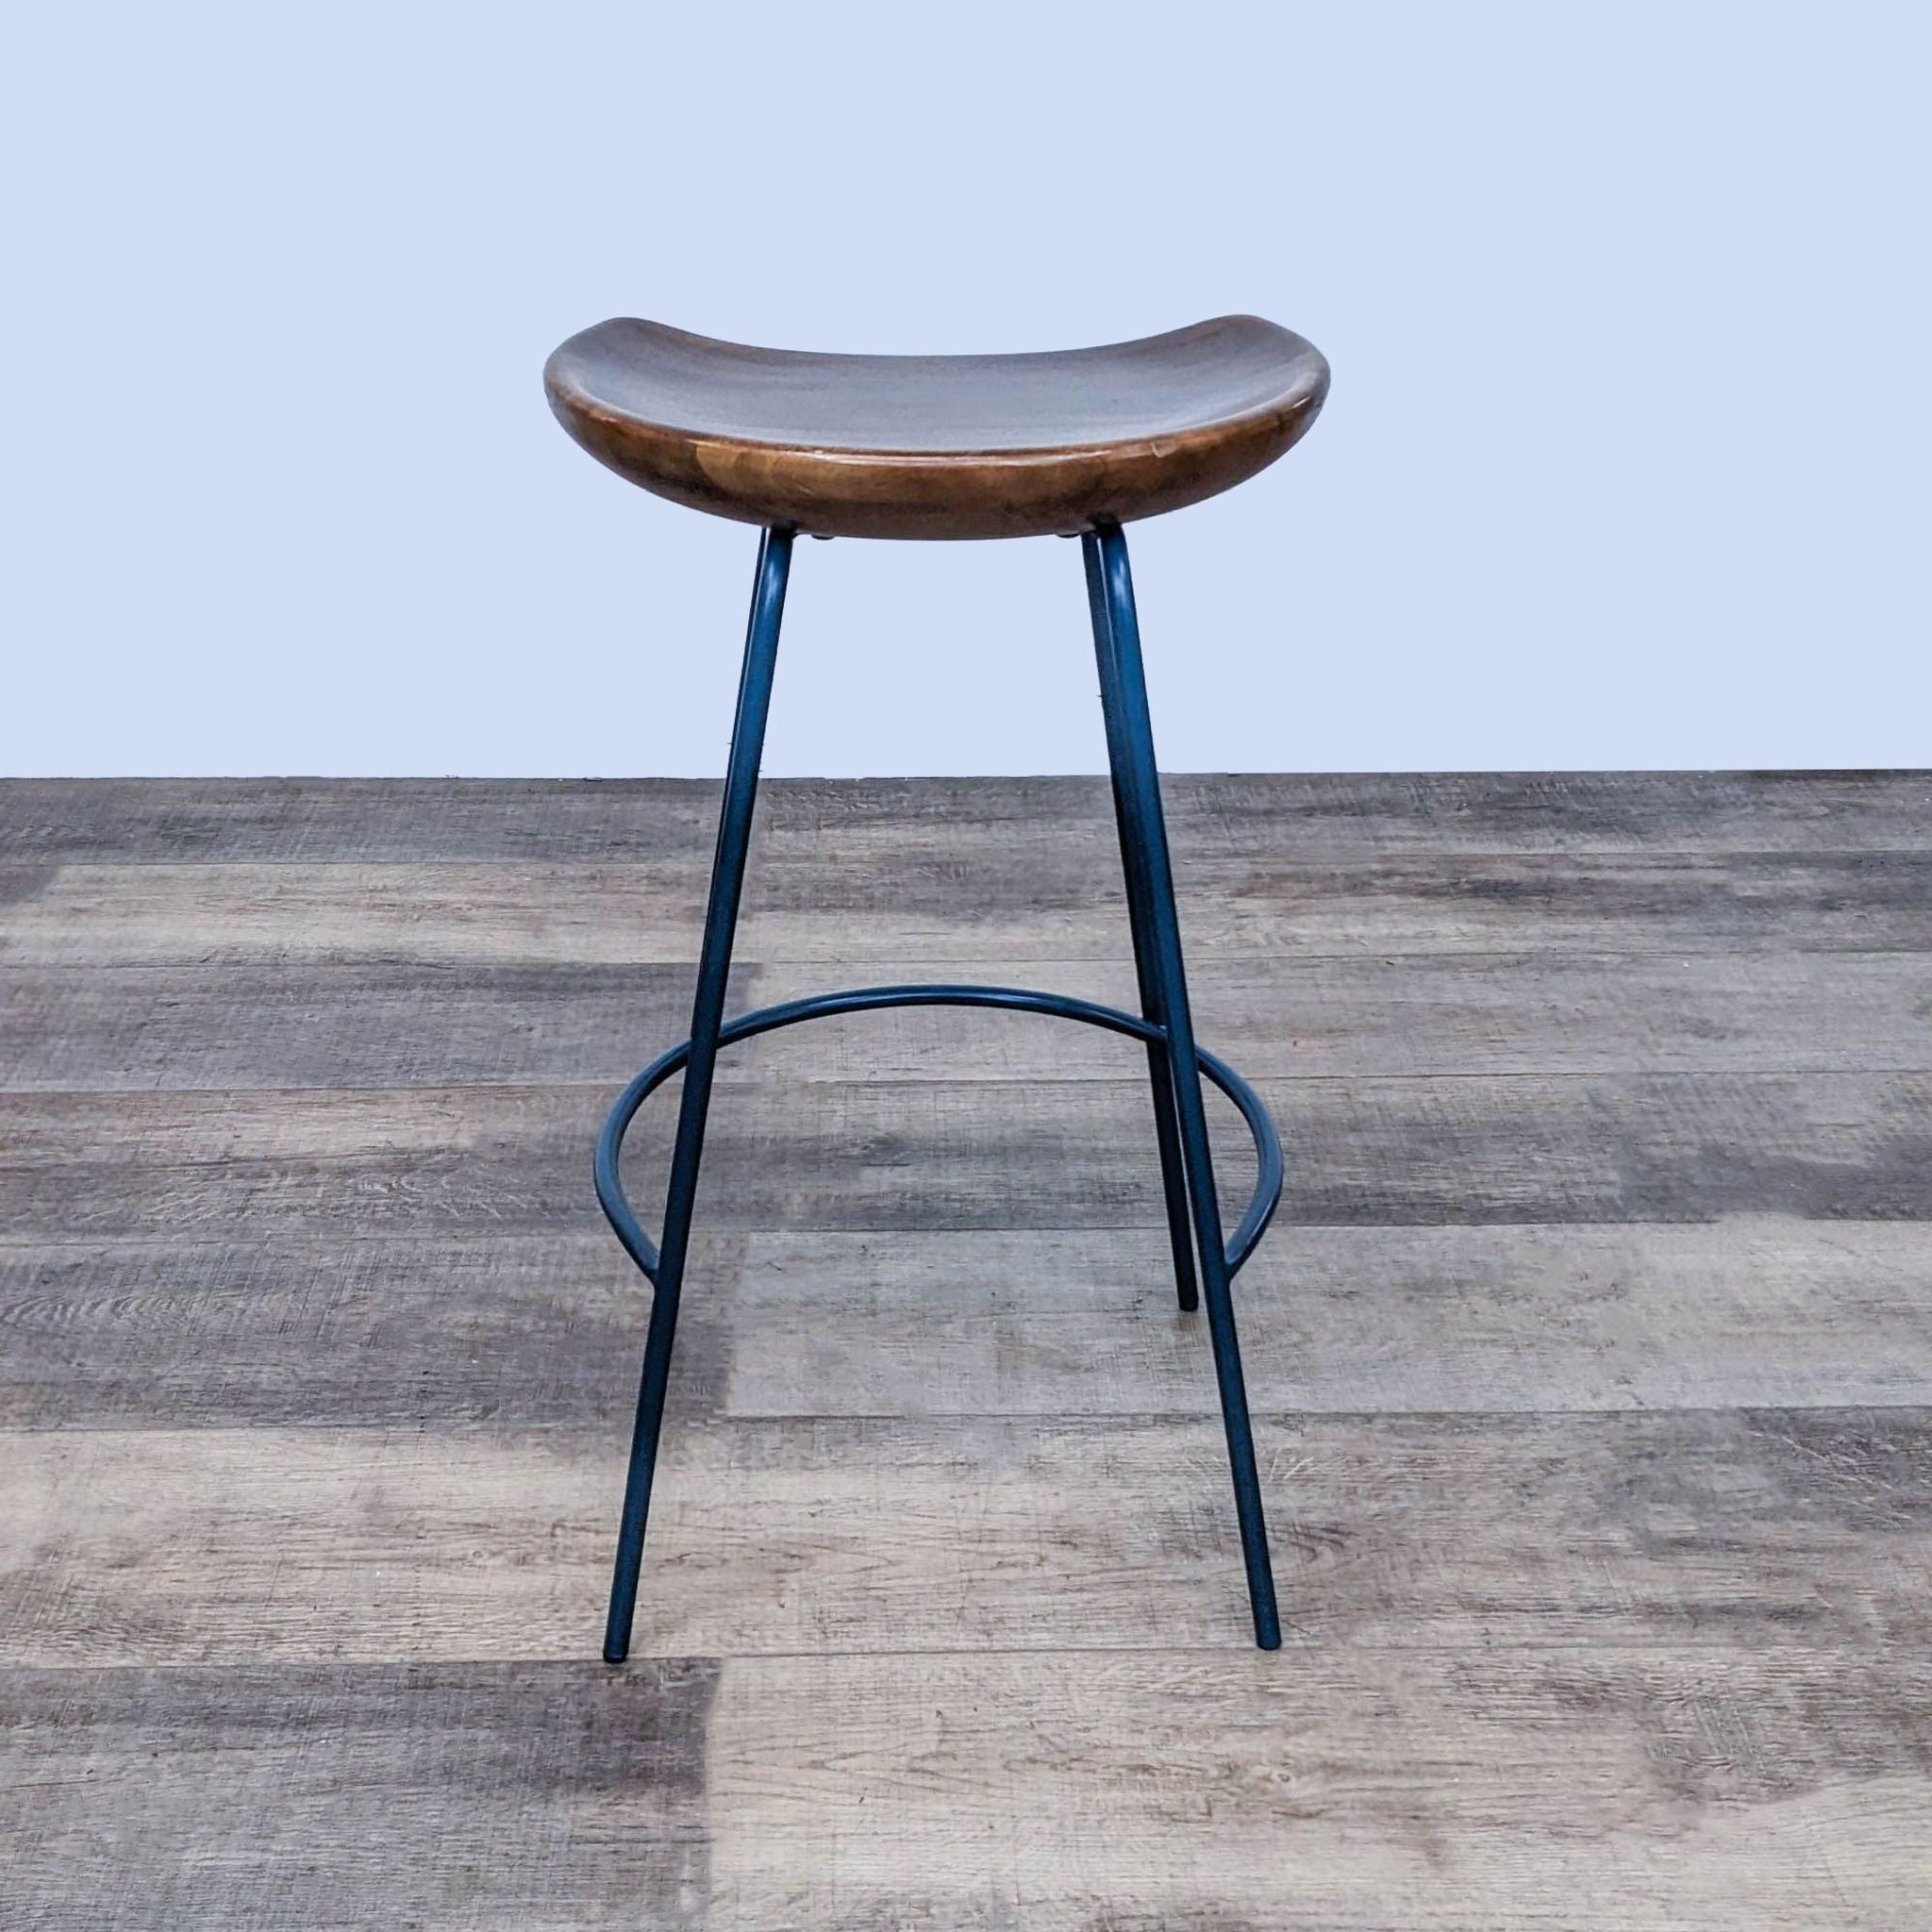 West Elm Alden Counter Stool with solid wood seat and black steel base, shown from the front.